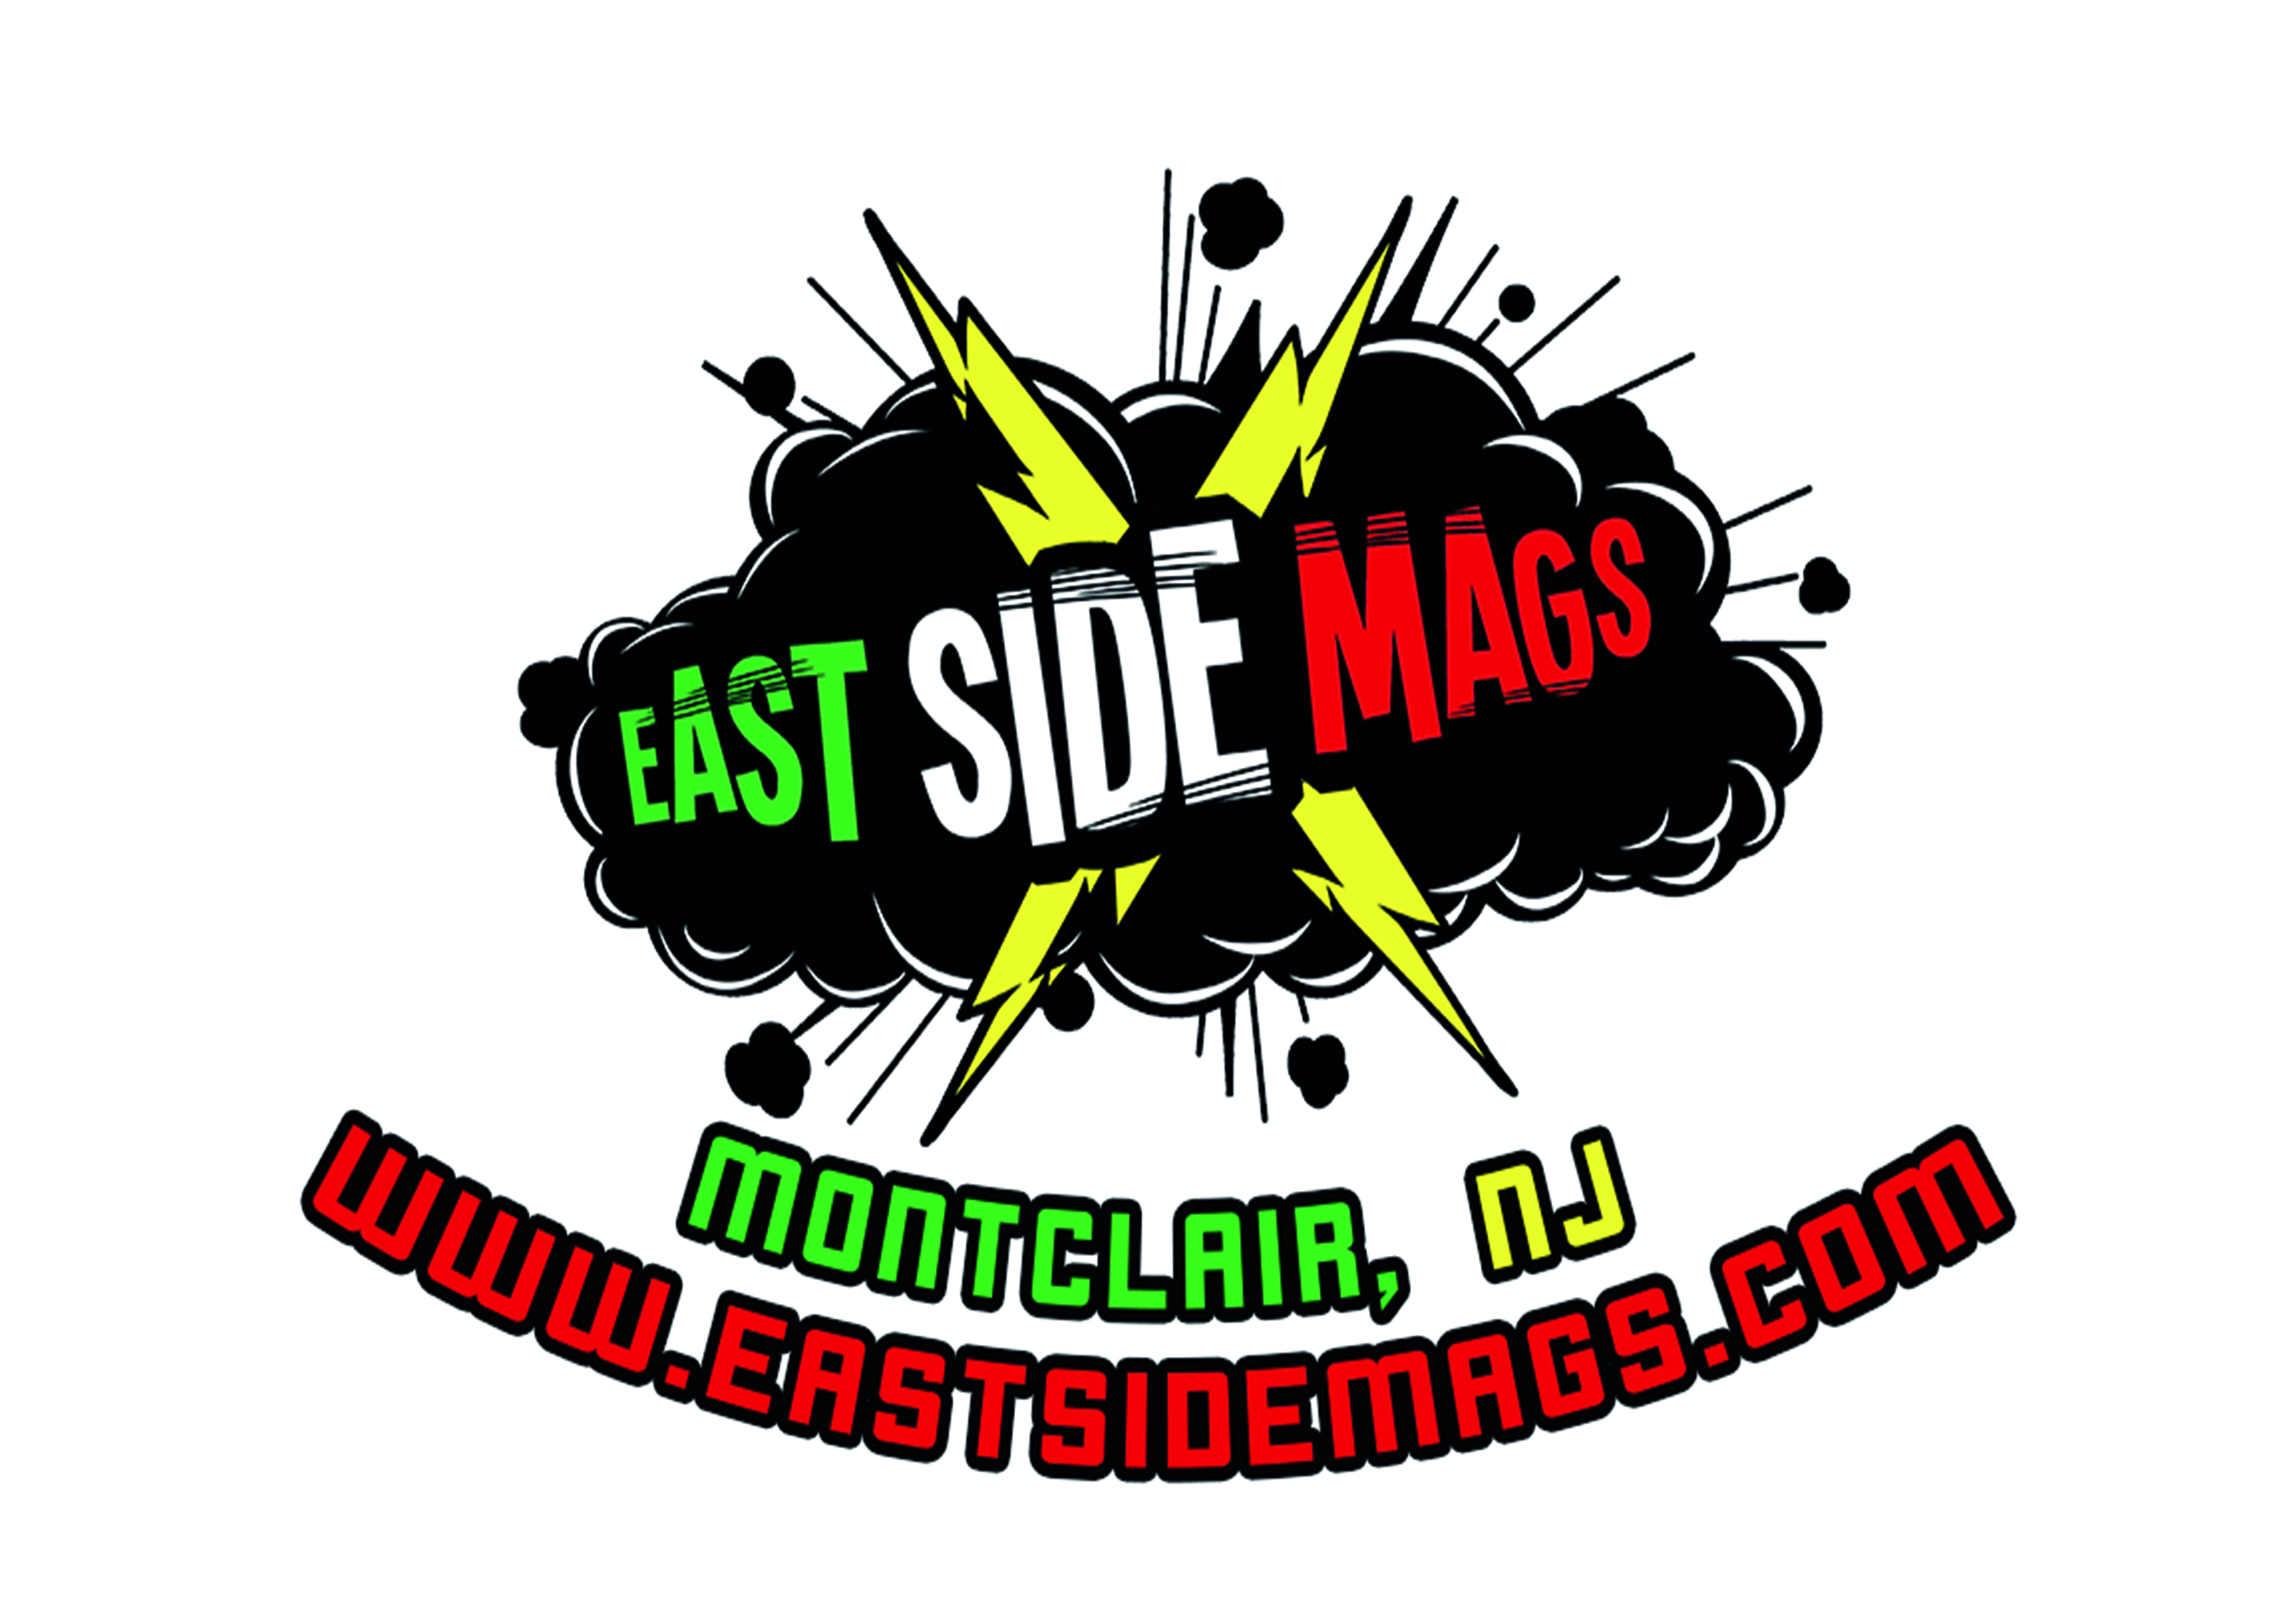 EAST SIDE MAGS